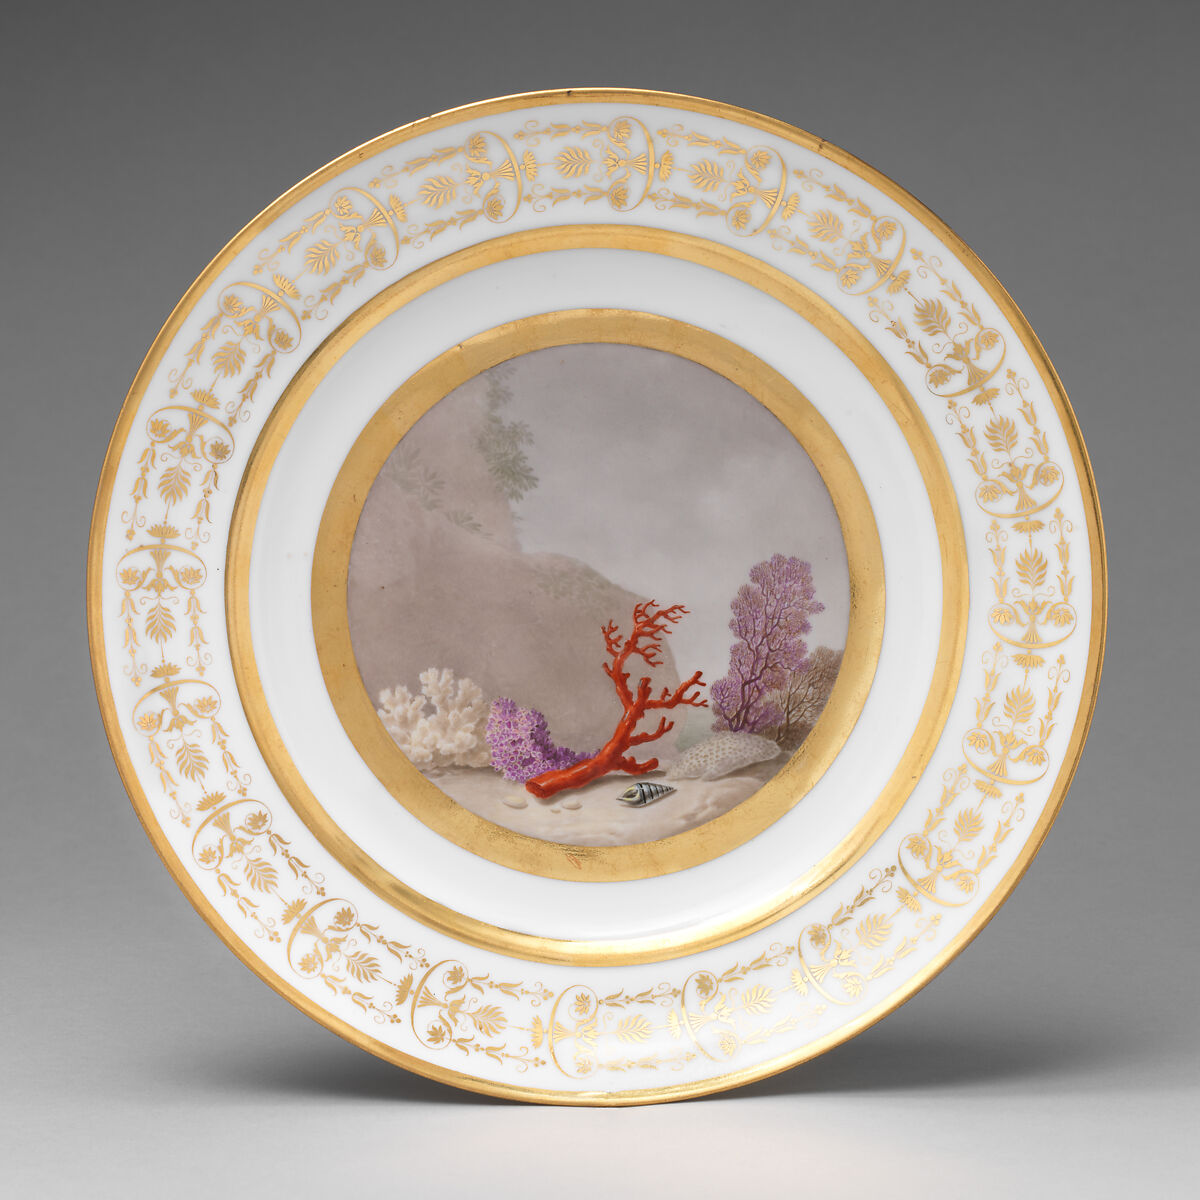 Plate with marine subject, Dihl et Guérhard (French, 1781–ca. 1824), Porcelain, French, Paris 